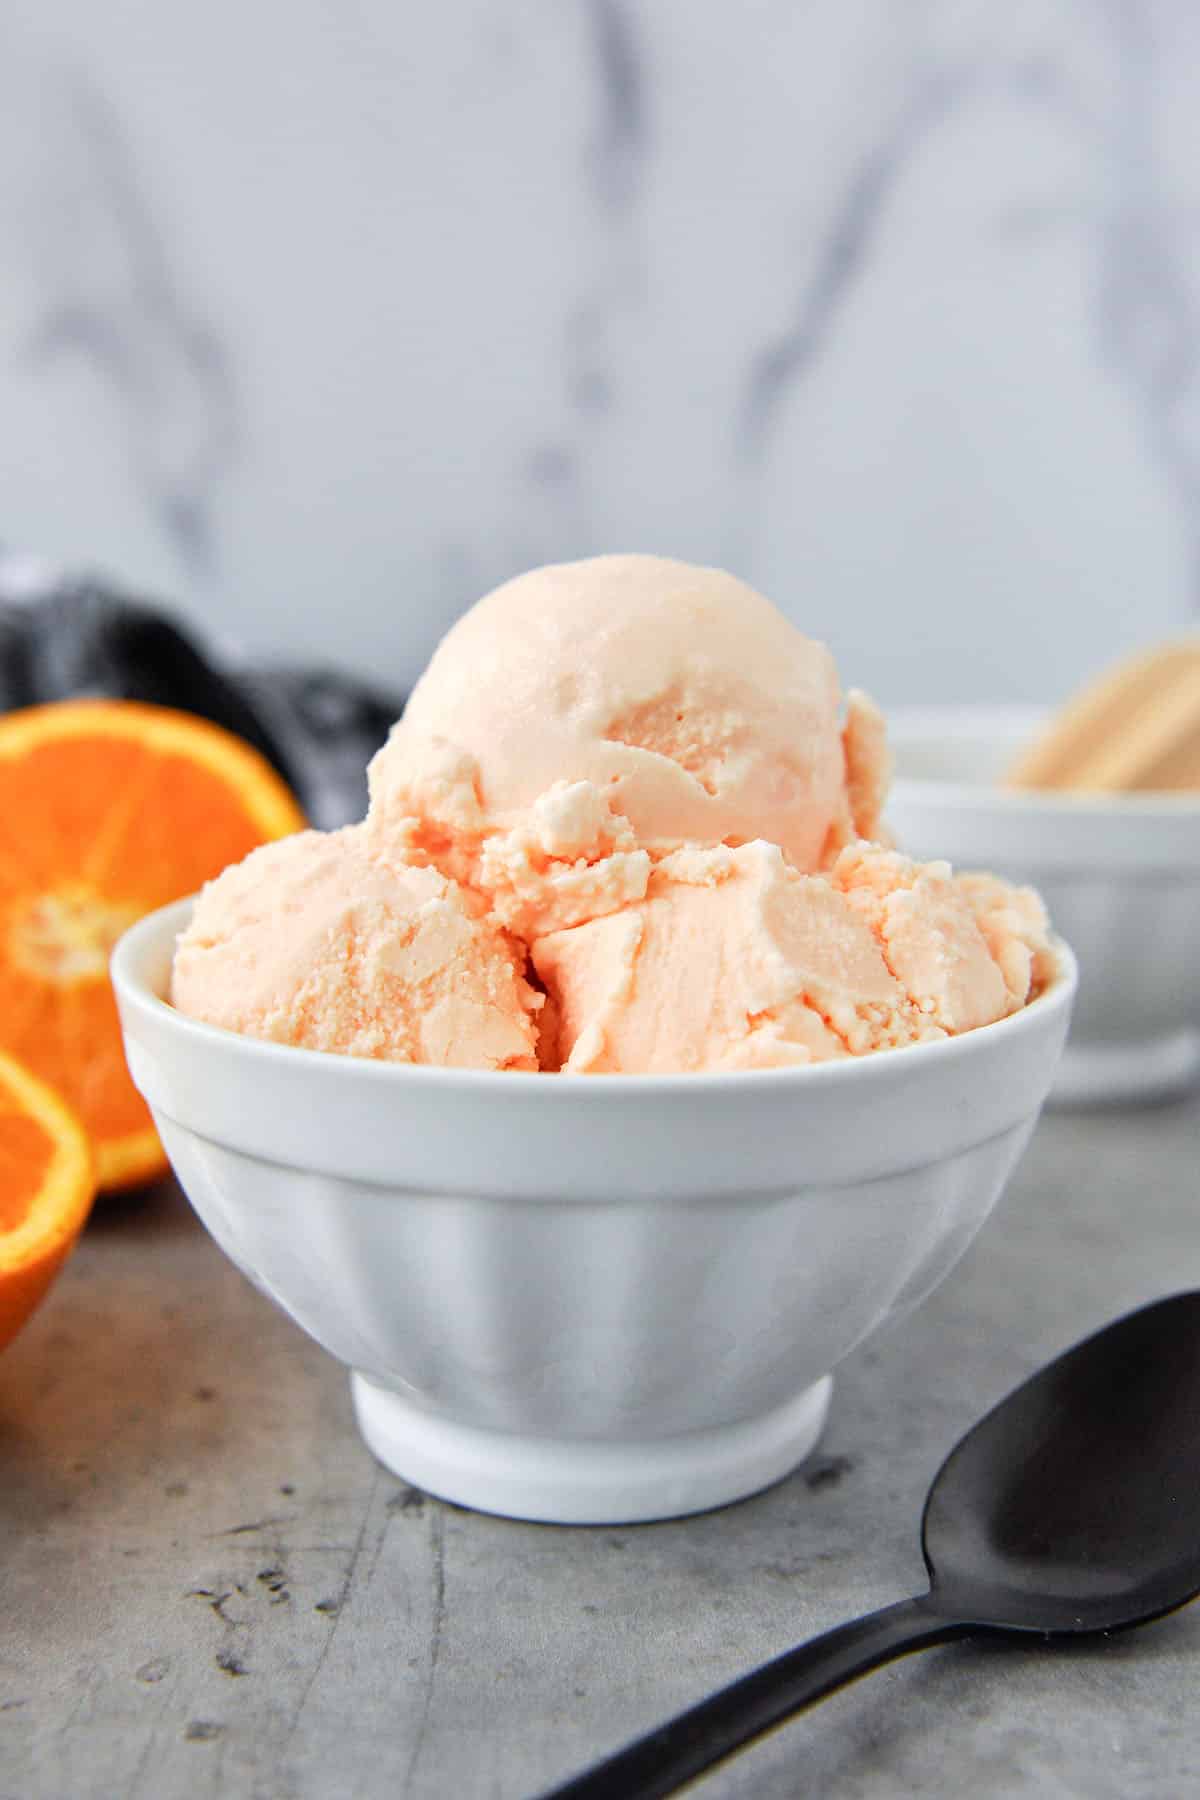 A bowl of ice cream with oranges in the background. Spoon in the foreground.